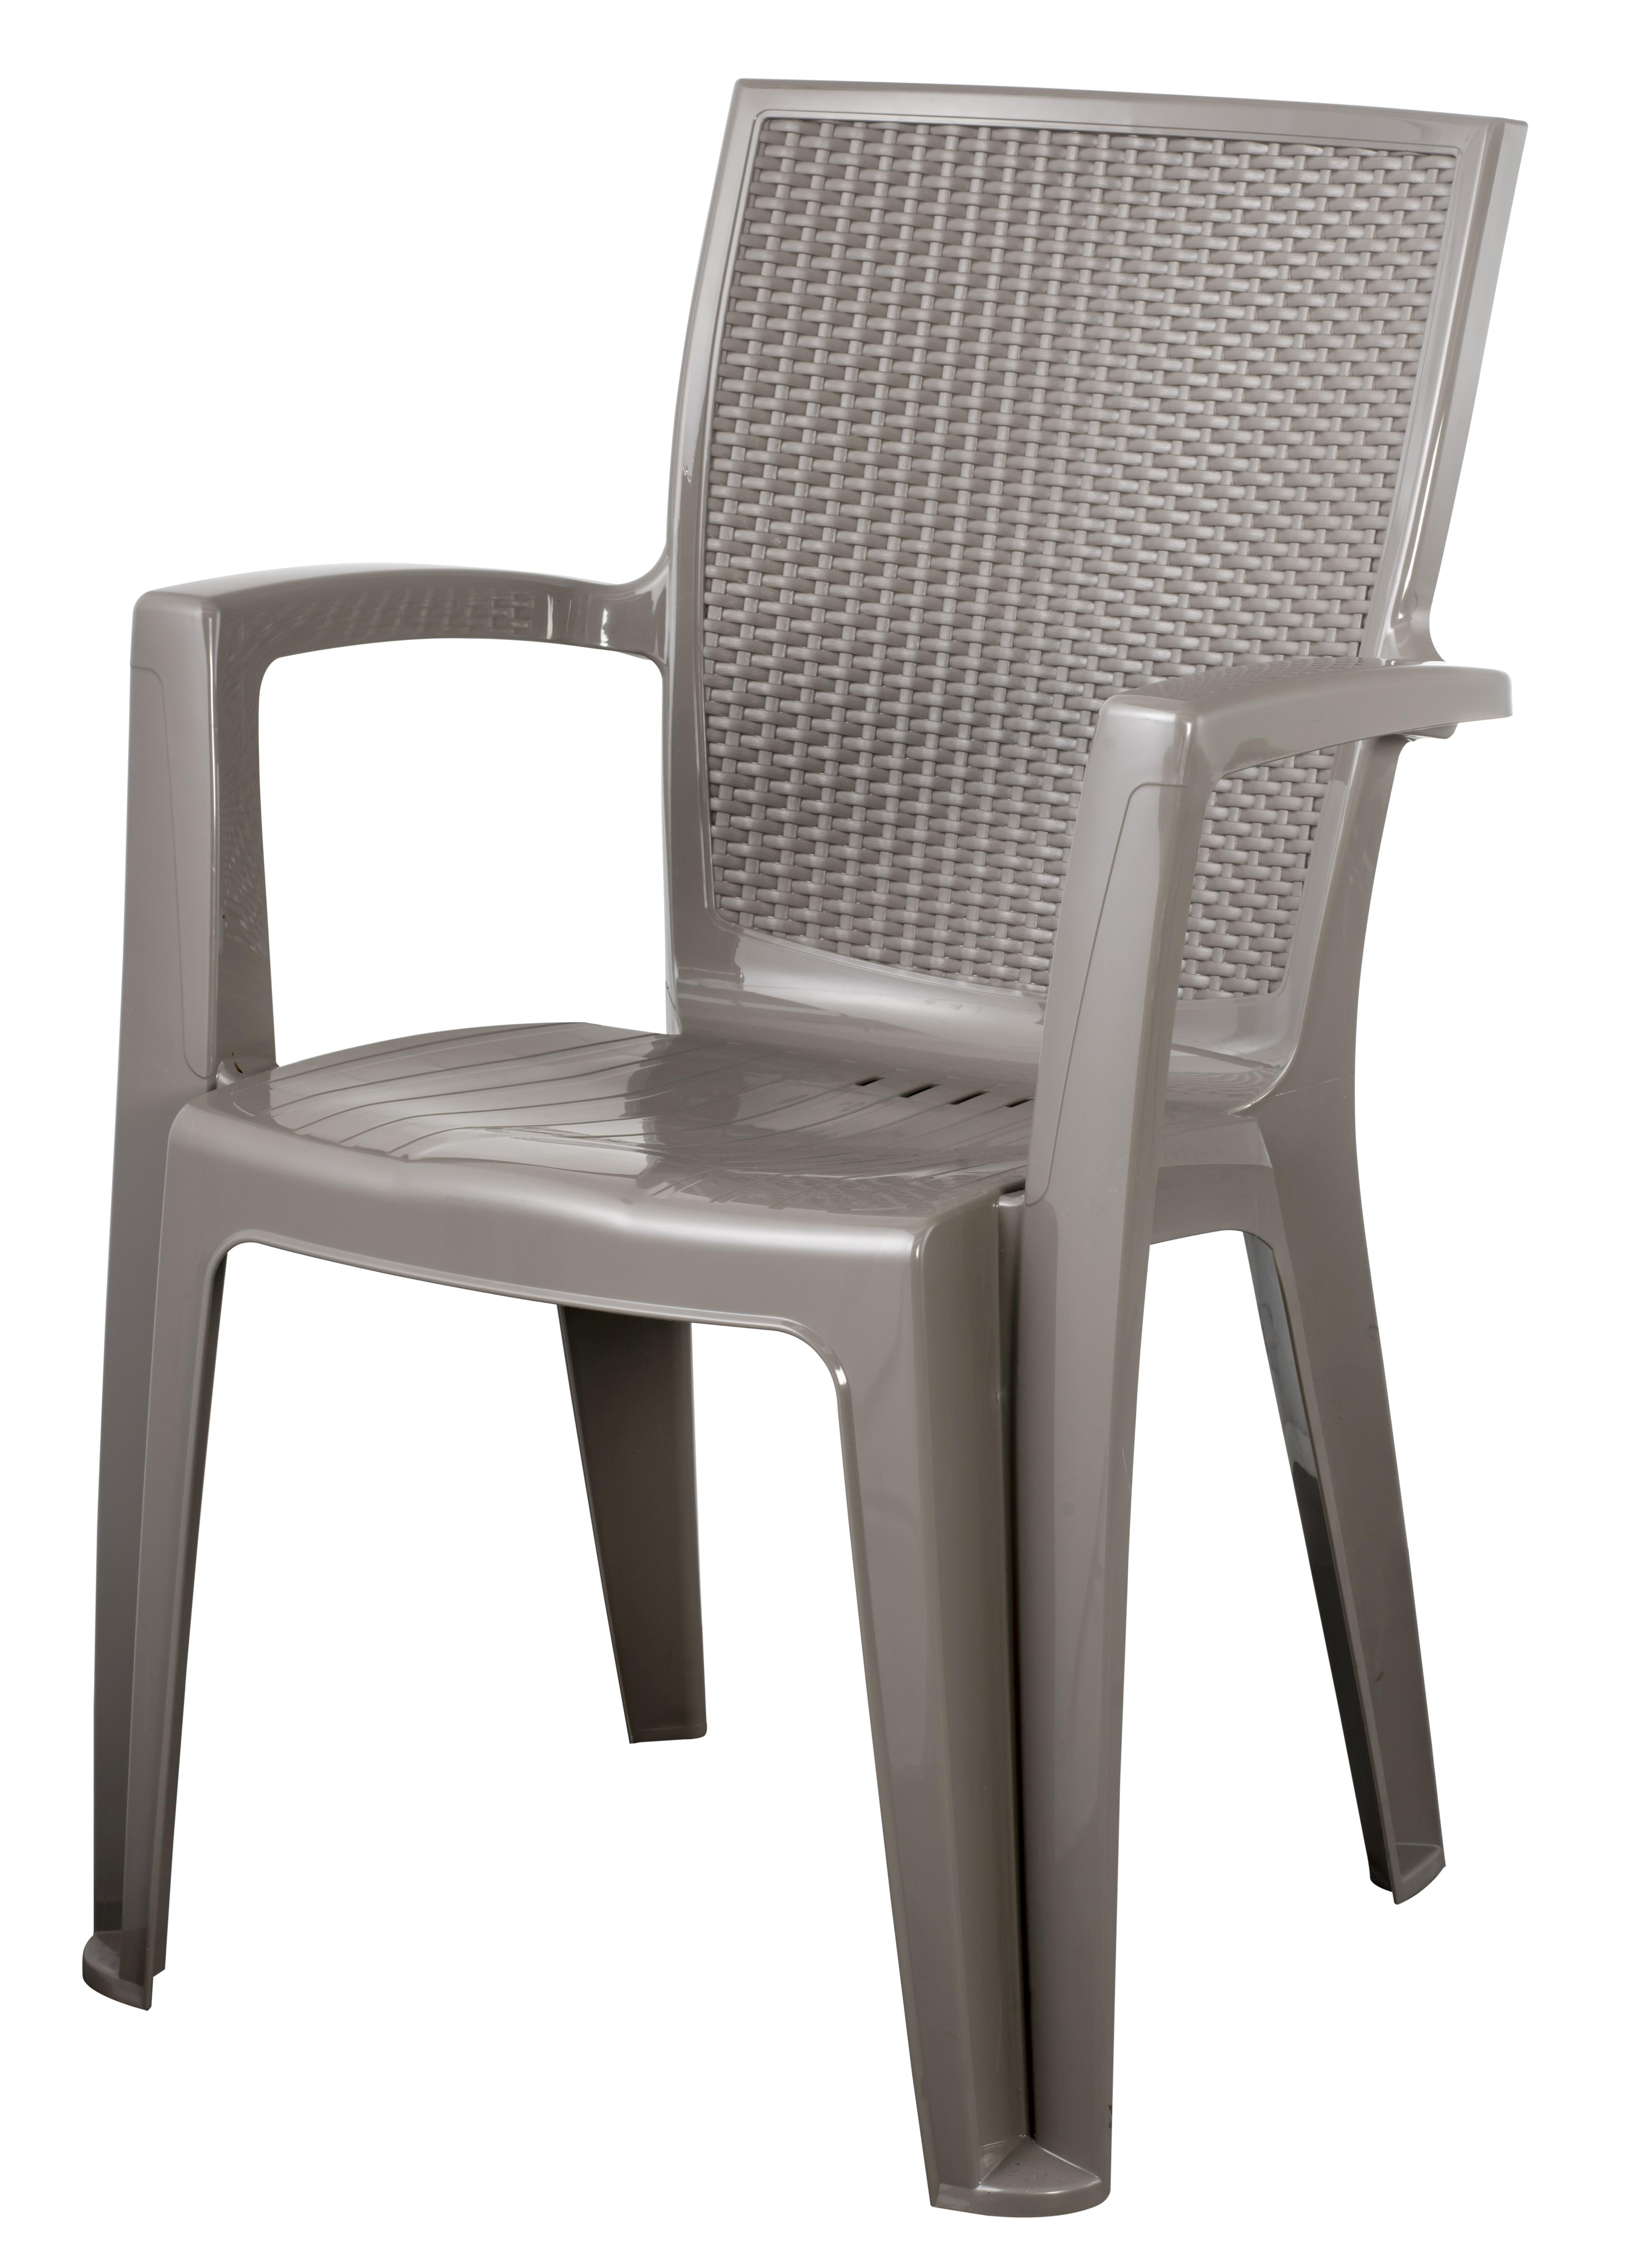 GIAVA OUTDOOR CHAIR 58X61X87CM - TAUPE